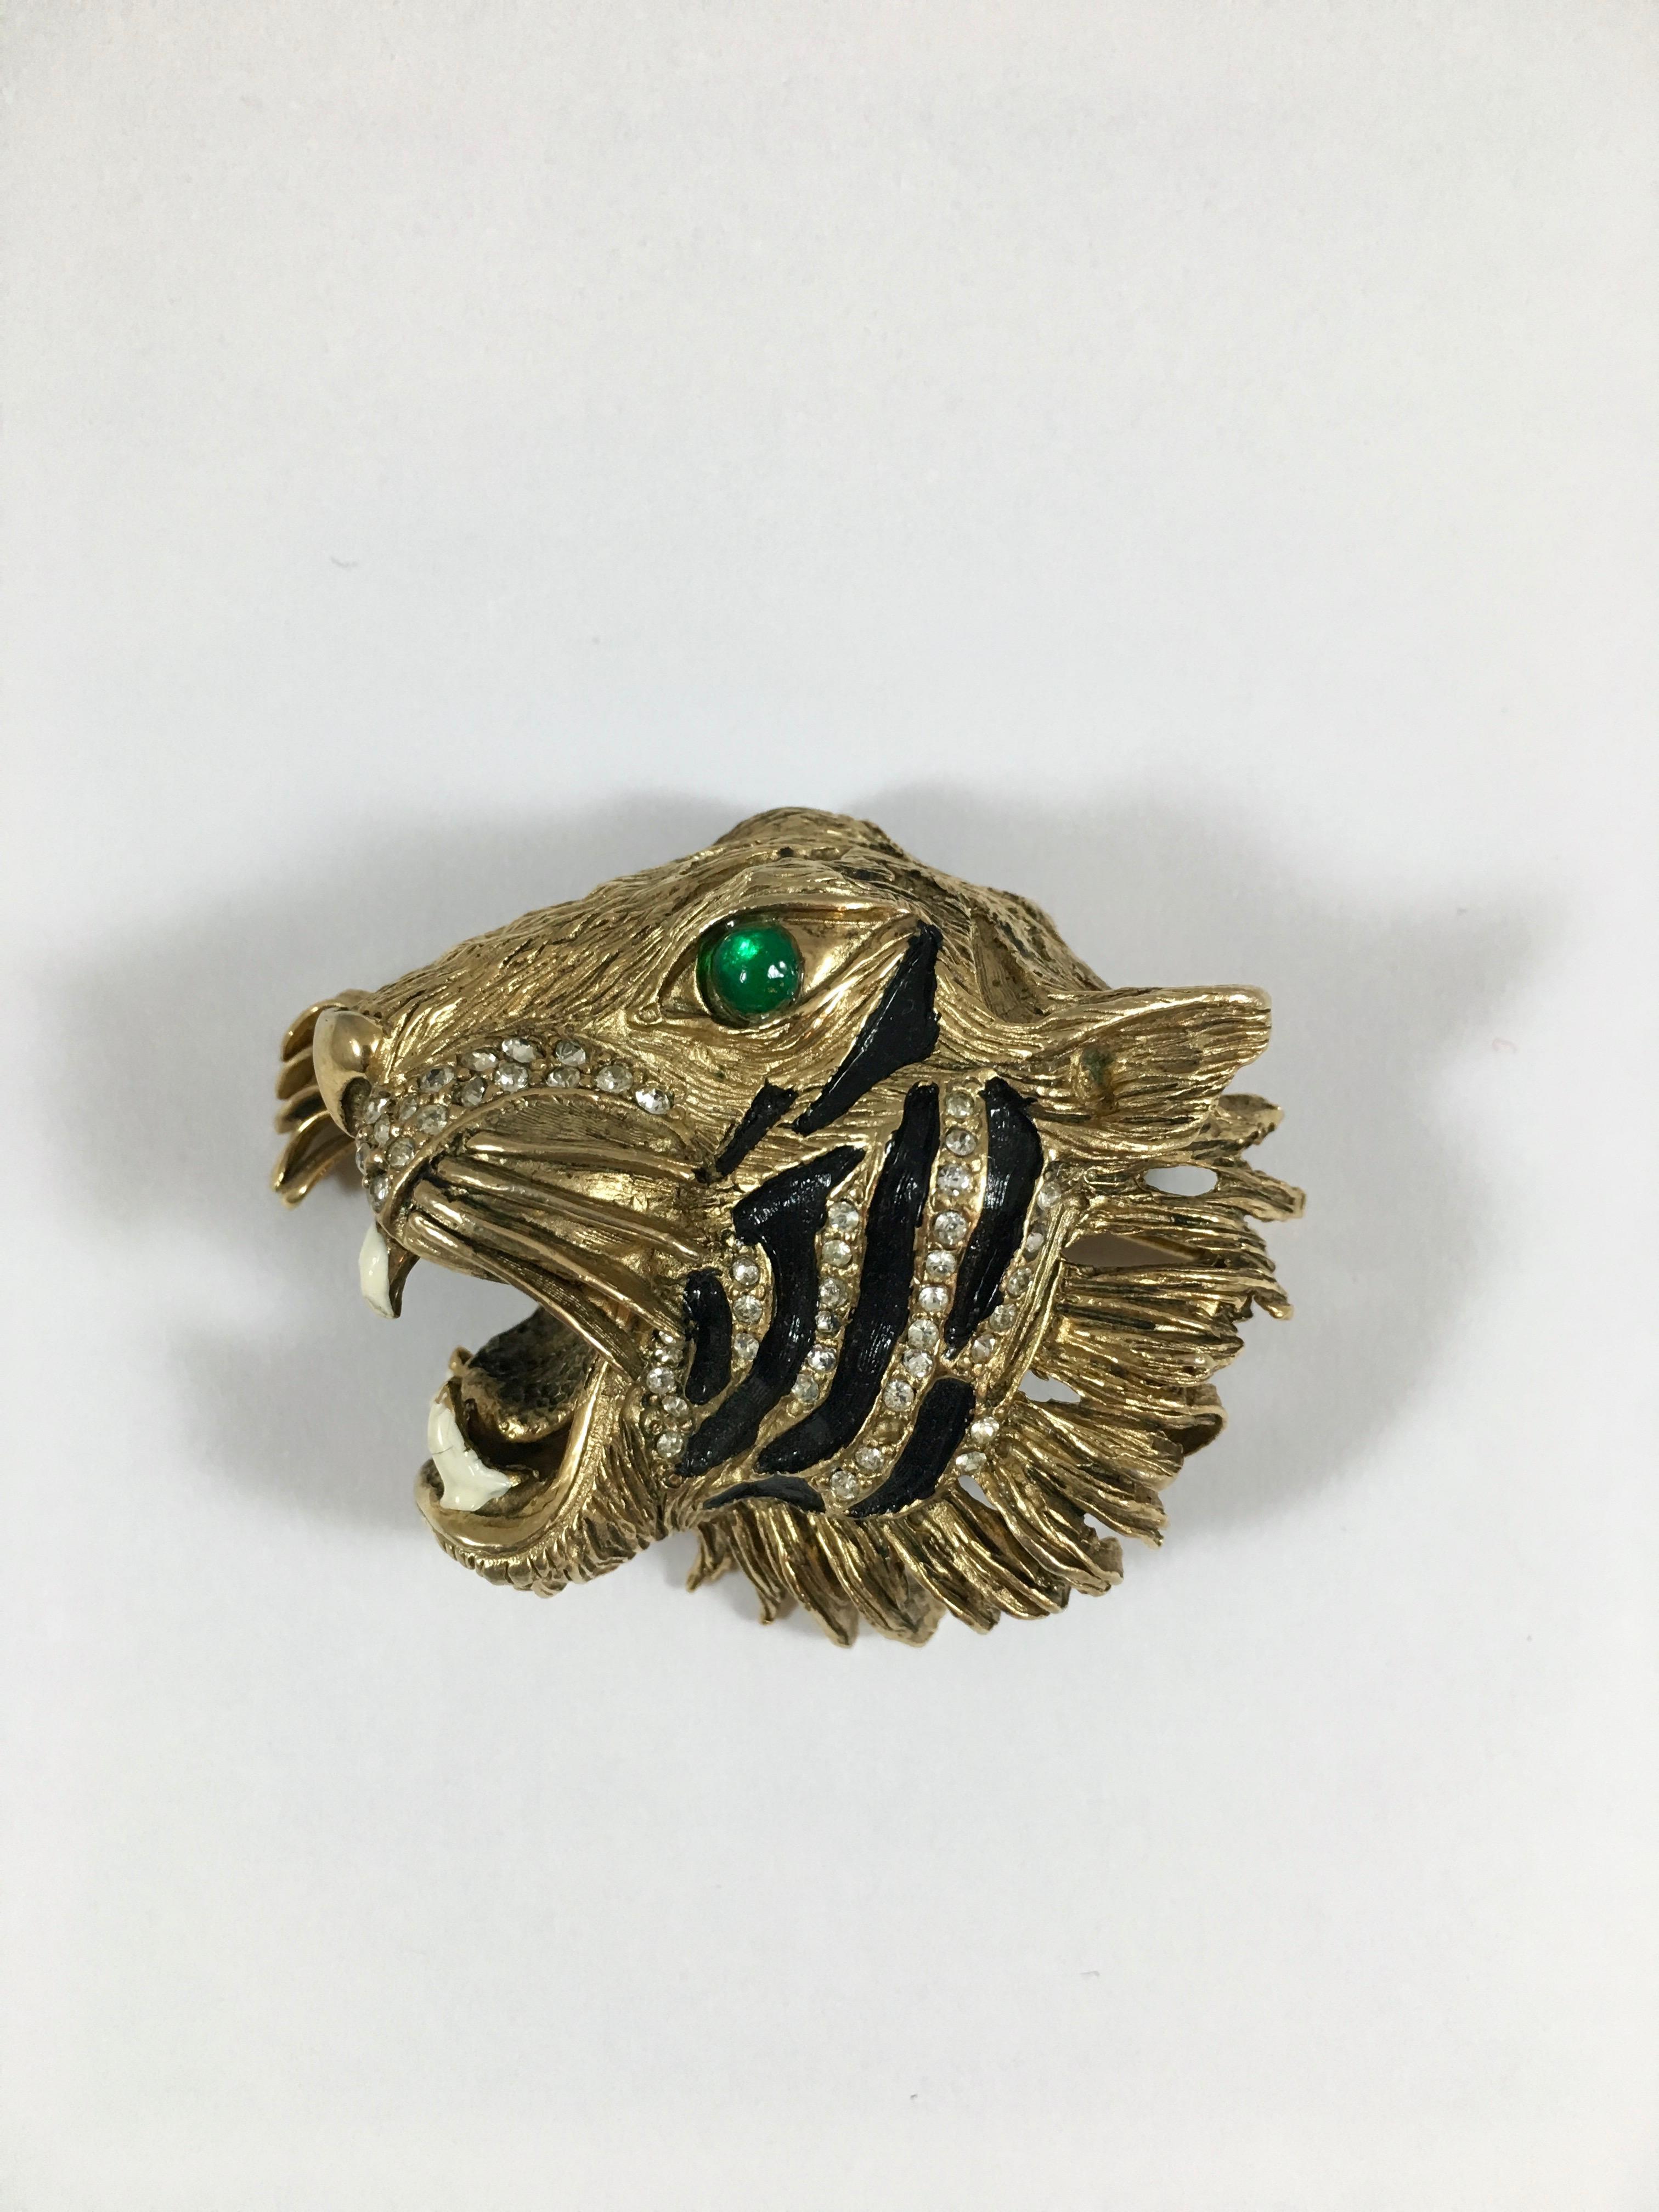 This is a fabulous 1940s Hattie Carnegie tiger head brooch. The design has been copied by Gucci and the brooch is now available in their Fall 2018 line (see image #8).  It is made out of a gold-toned metal and has black enamel stripes, white enamel